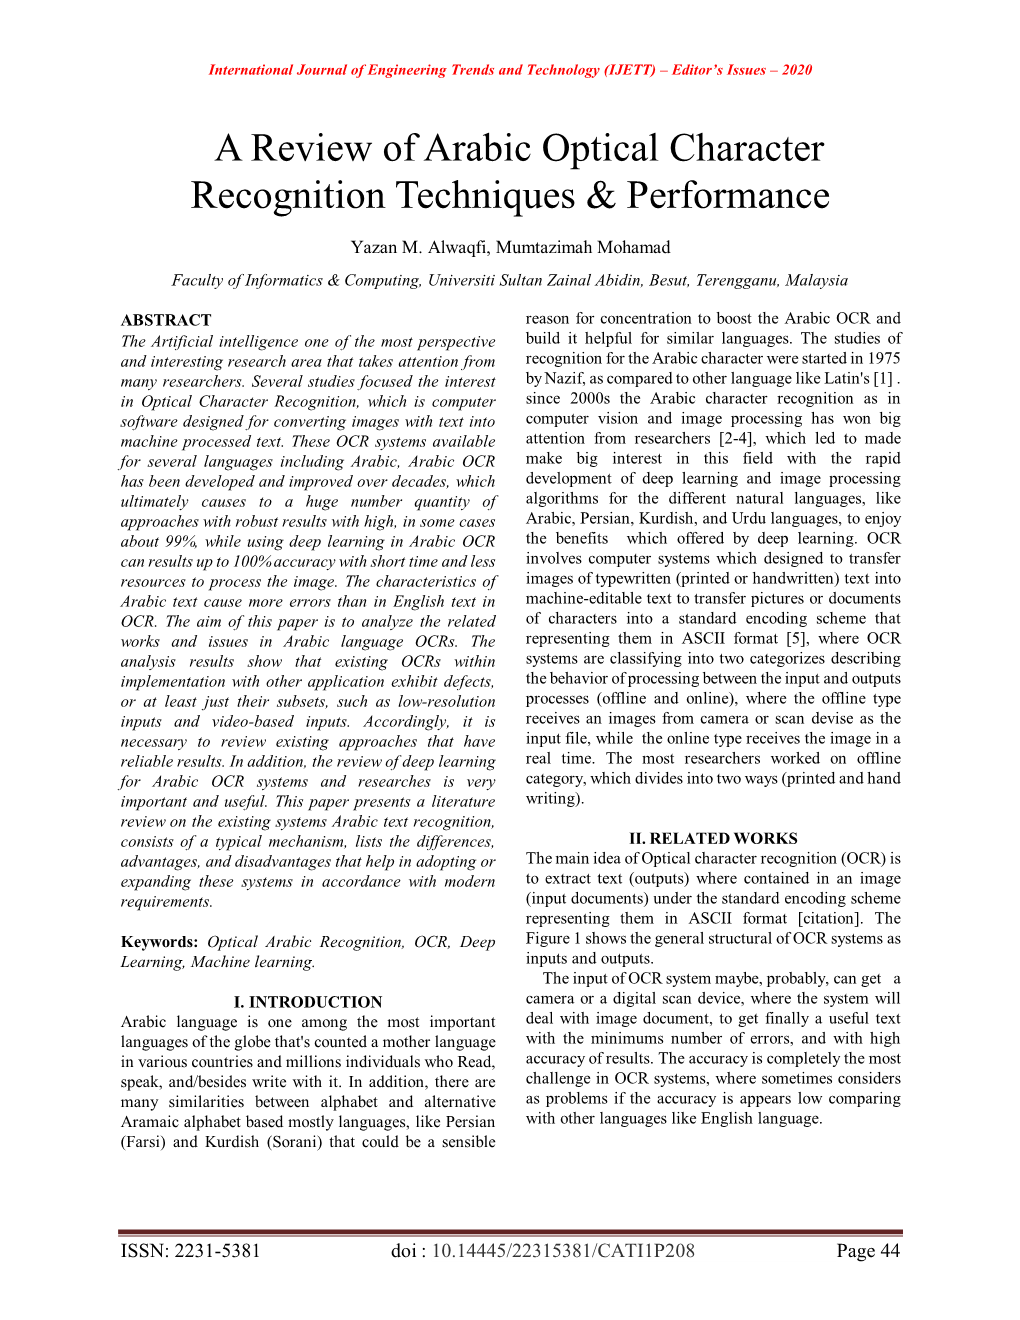 A Review of Arabic Optical Character Recognition Techniques & Performance